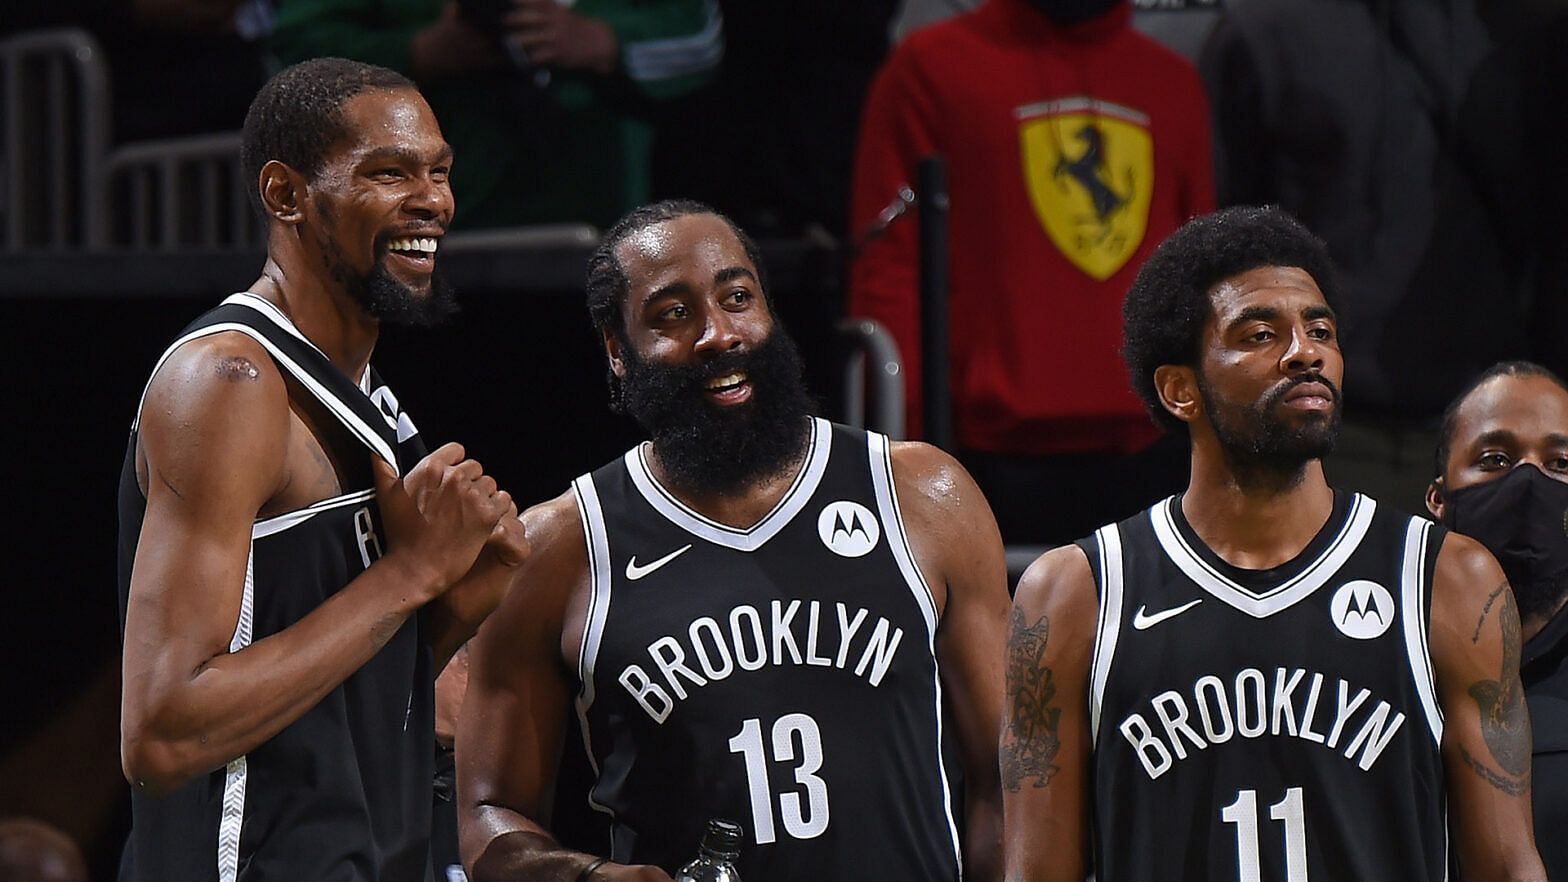 The Brooklyn Nets are currently 11-11 at home this season. [Photo: NBA.com]